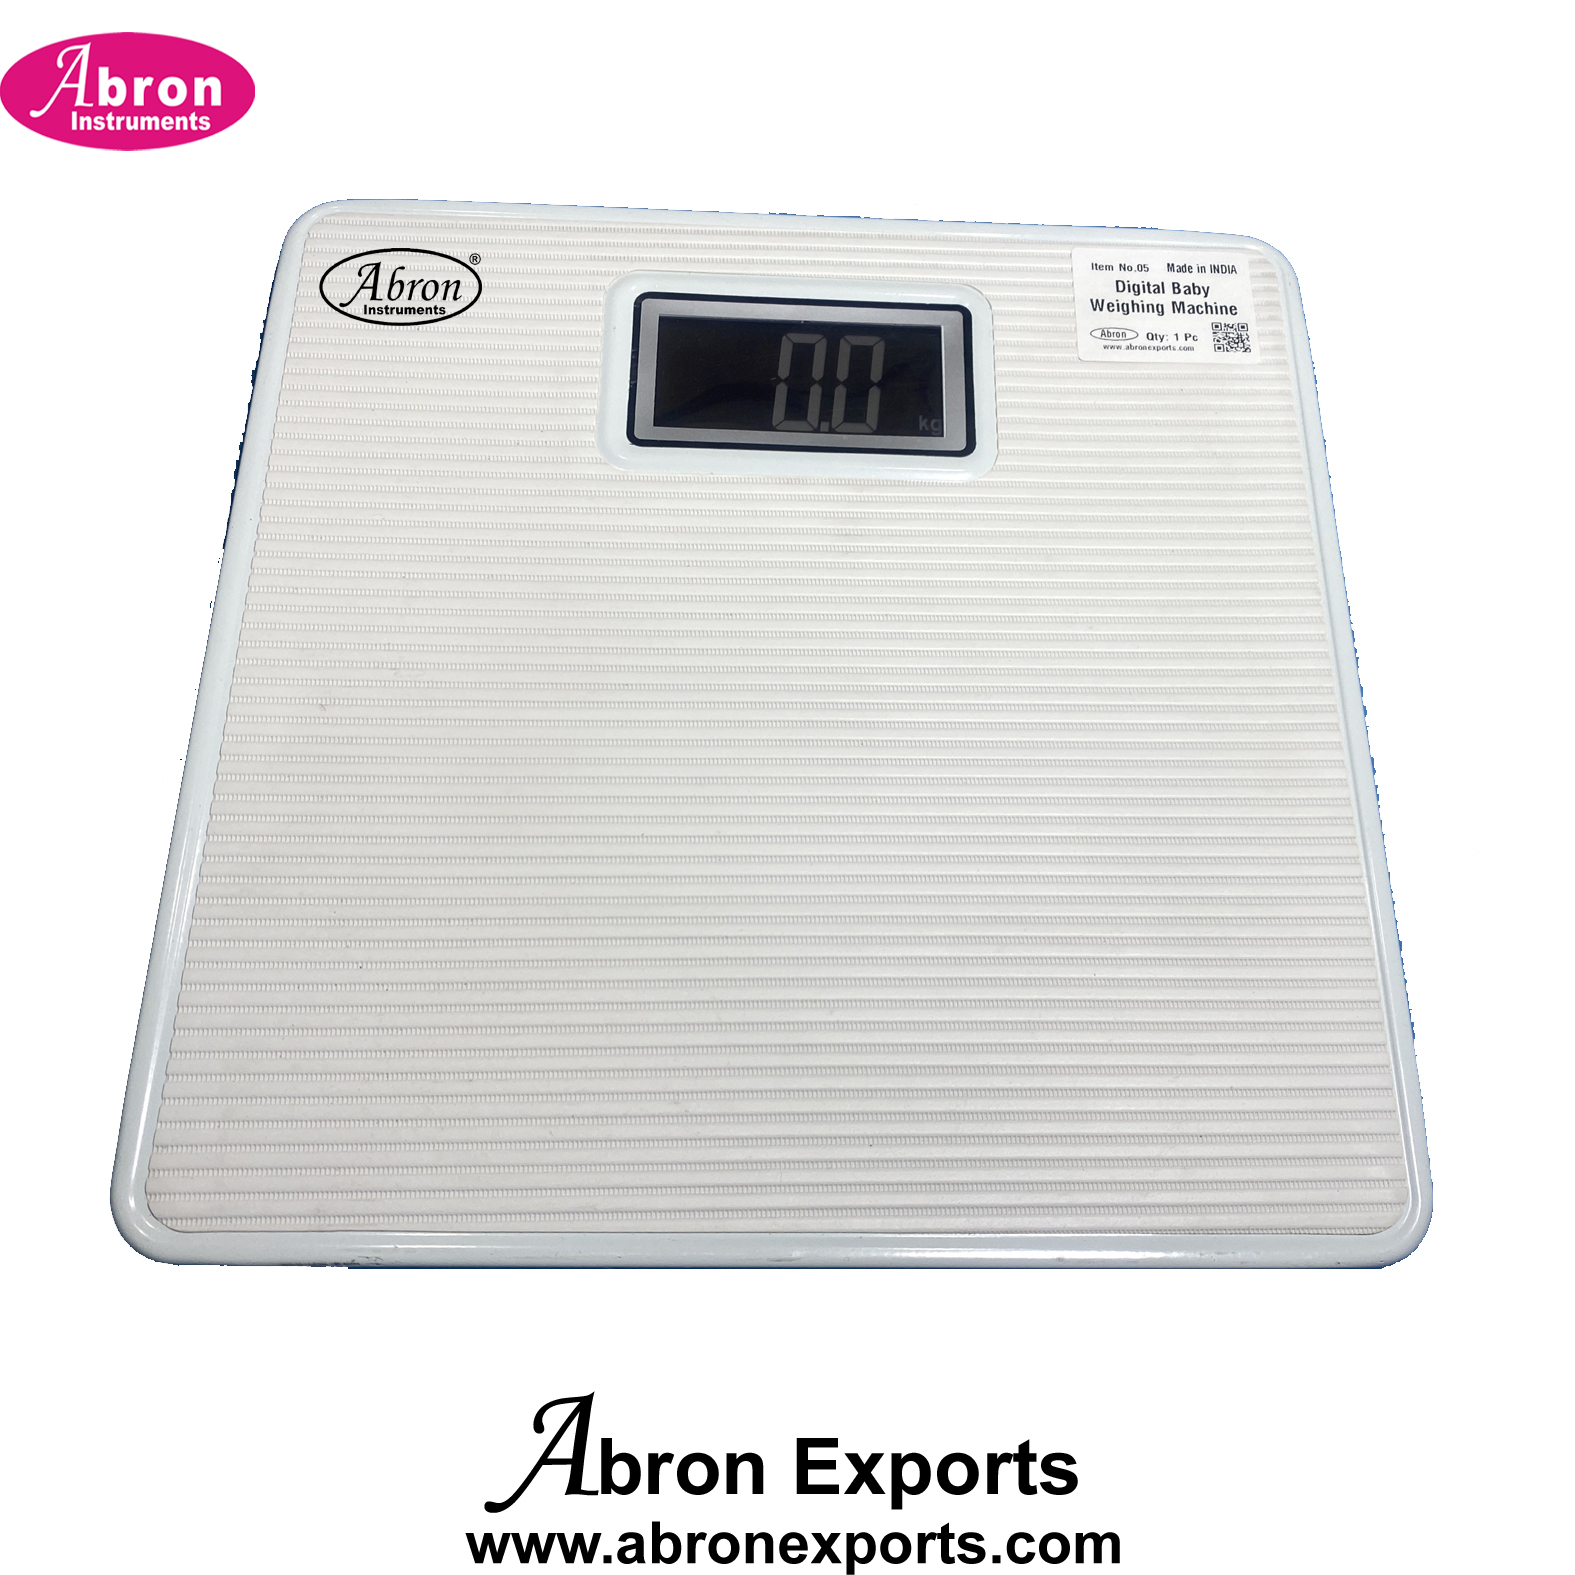 Balance Digital Weighing Scale Child Mother Adult Balance 150KG 0.1kg 100gm Scale With Platform Baby 10pc Abron ABM-3255PD1 